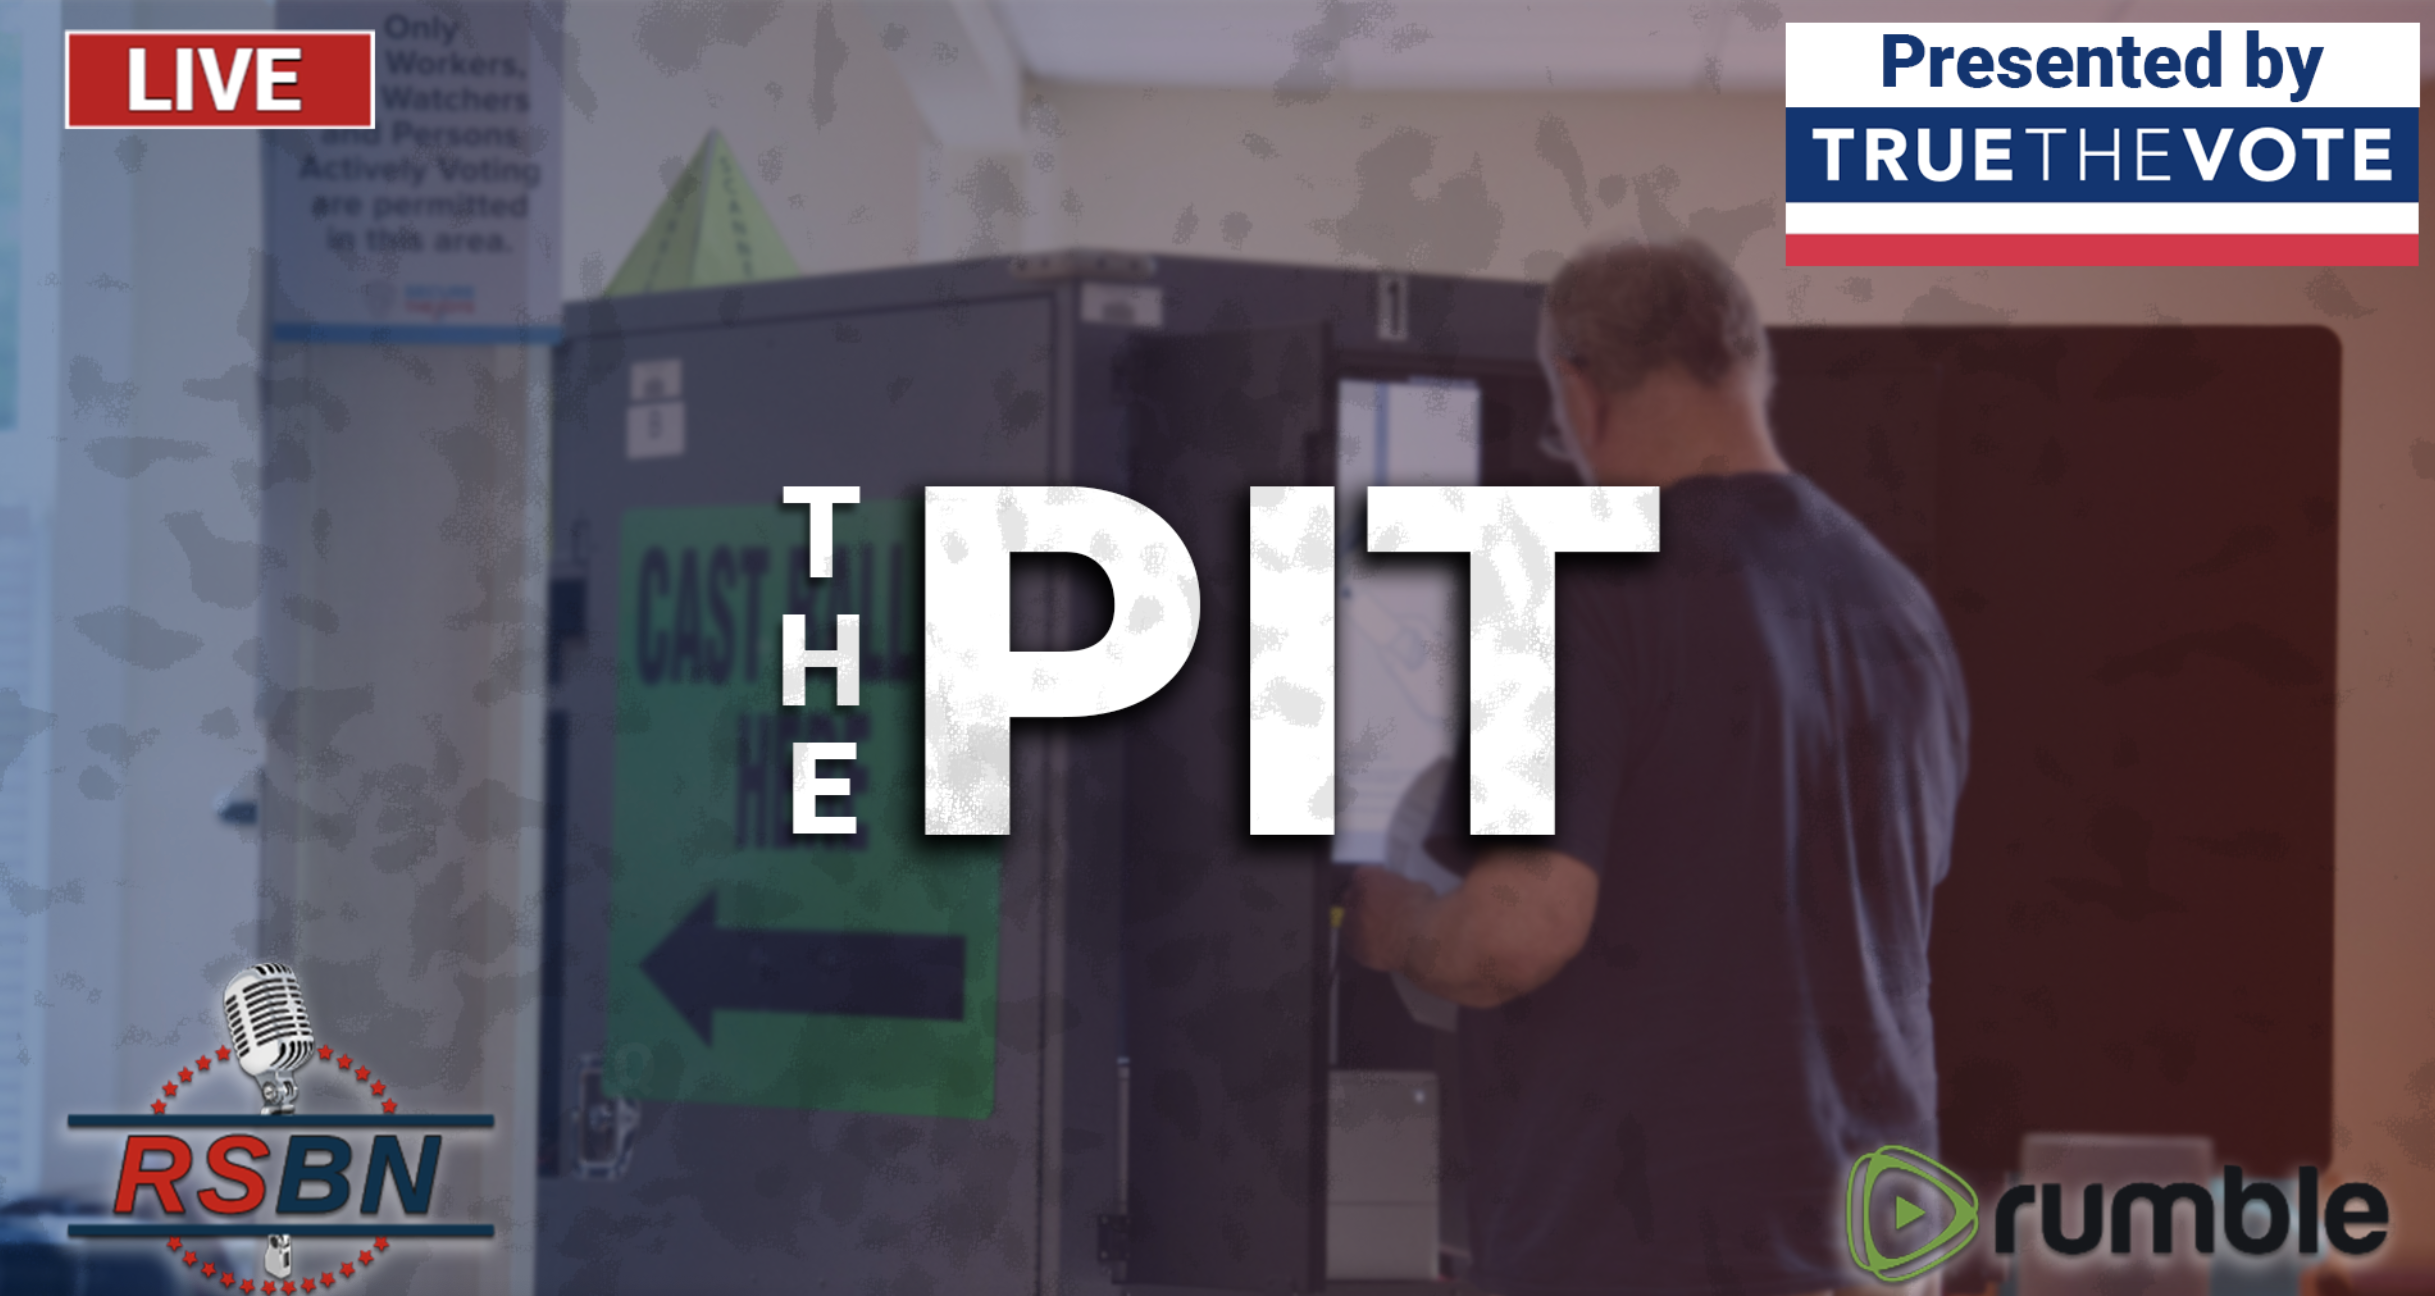 LIVESTREAM TODAY 12PM EST: True The Vote - The Pit - Massive Evidence To Be Released On "How They Did It!"